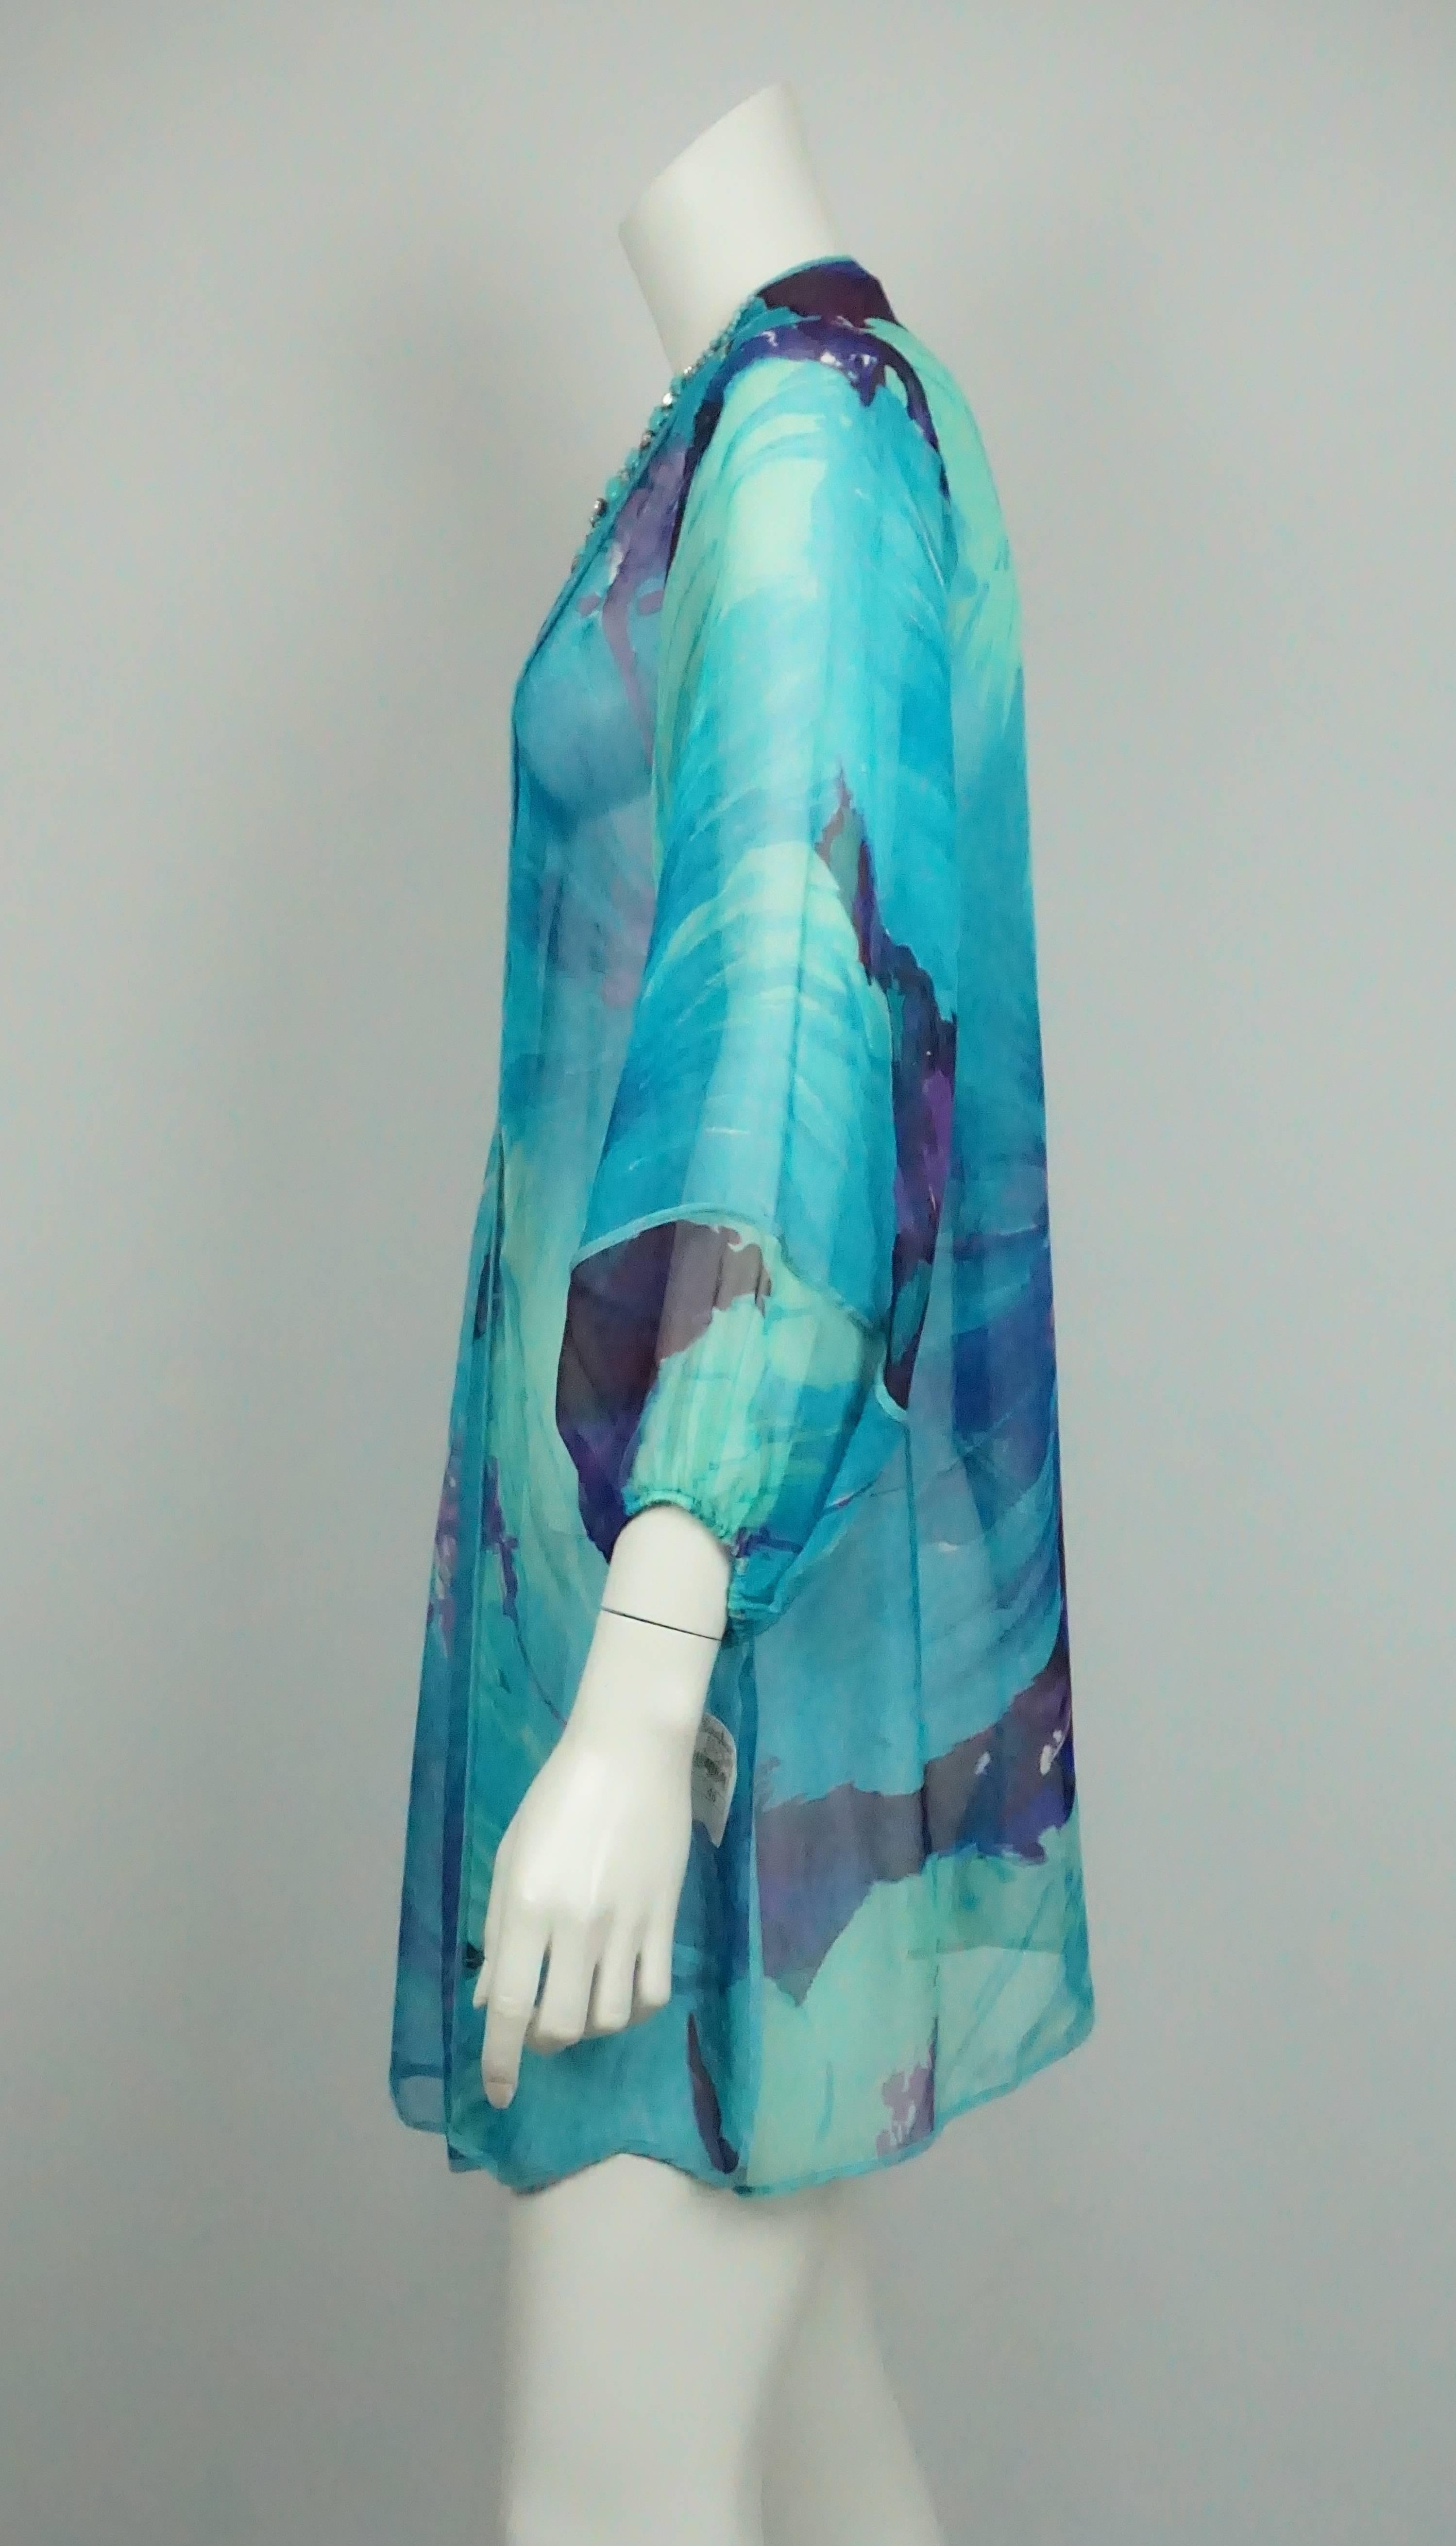 Bluemarine Blue Print Silk Chiffon Tunic Top w/ Beading - 46 - NWT  This gorgeous long sleeve tunic top is in excellent condition. It is embellished around the front of the neckline with stones, beads, and multi colored rhinestones. There is details